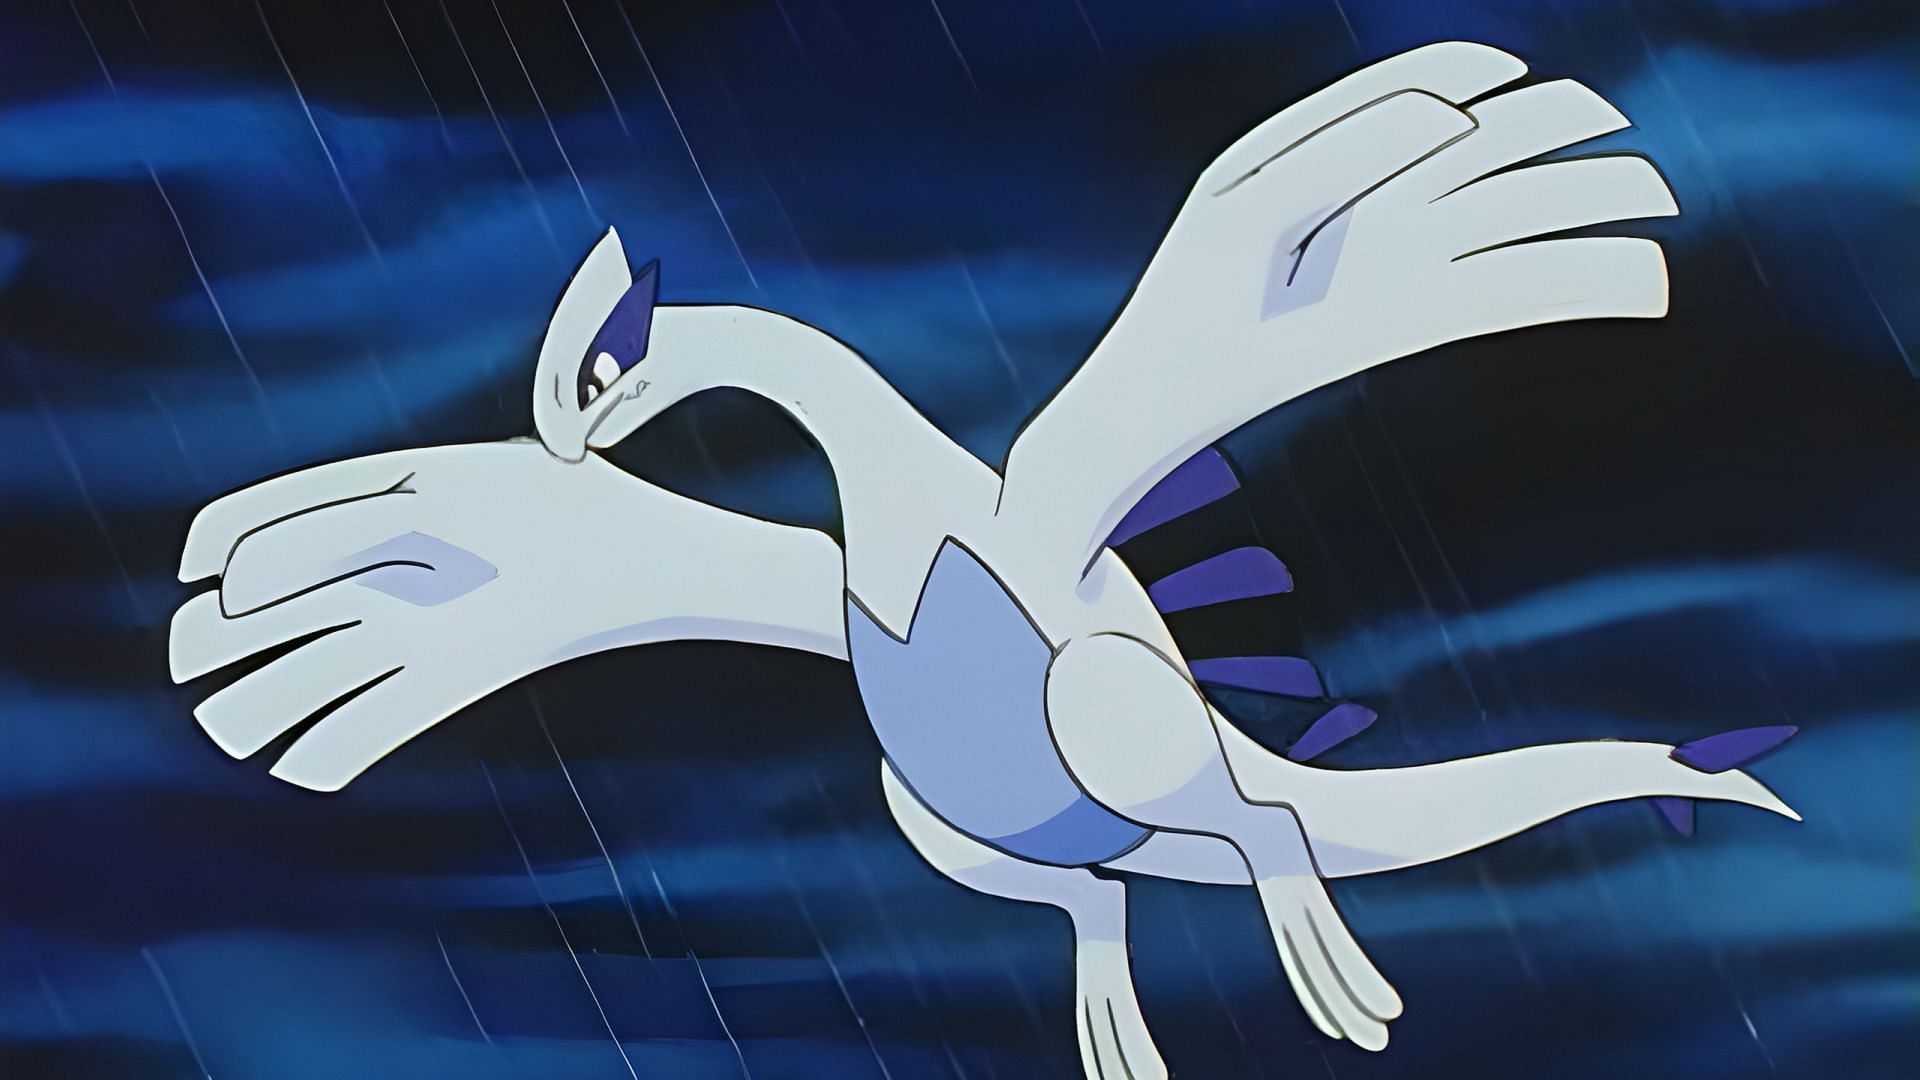 Lugia has remained a popular Pokemon, and its Paradox form would likely be a hit (Image via The Pokemon Company)